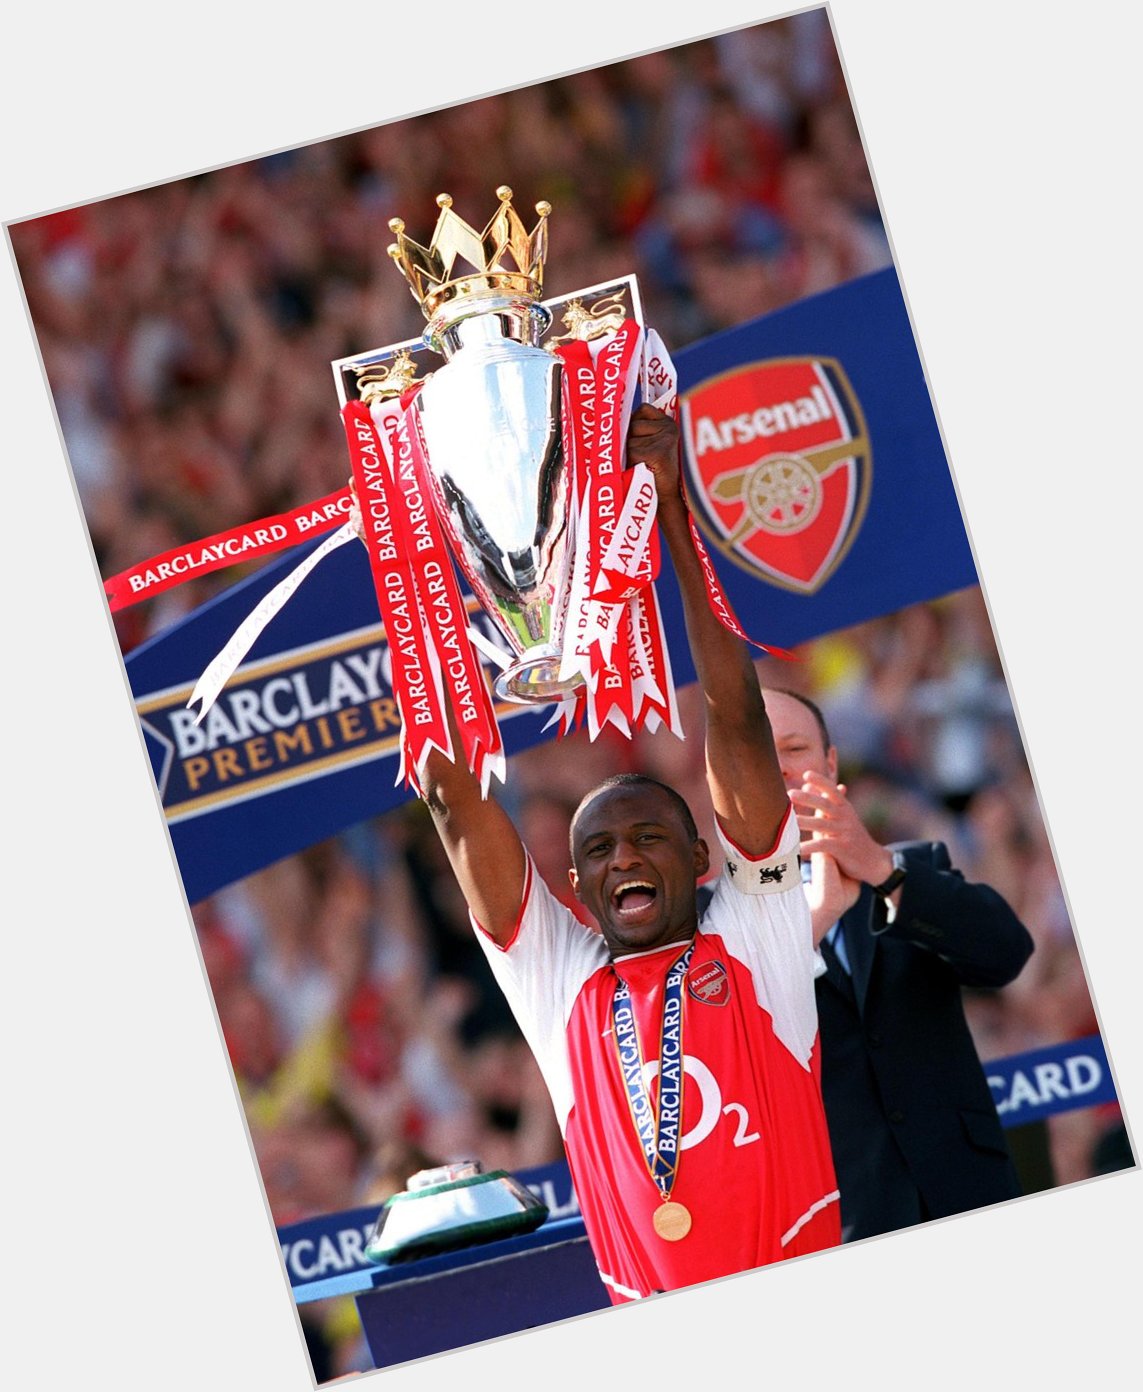 Happy Birthday to Arsenal legend and former captain Patrick Vieira! 